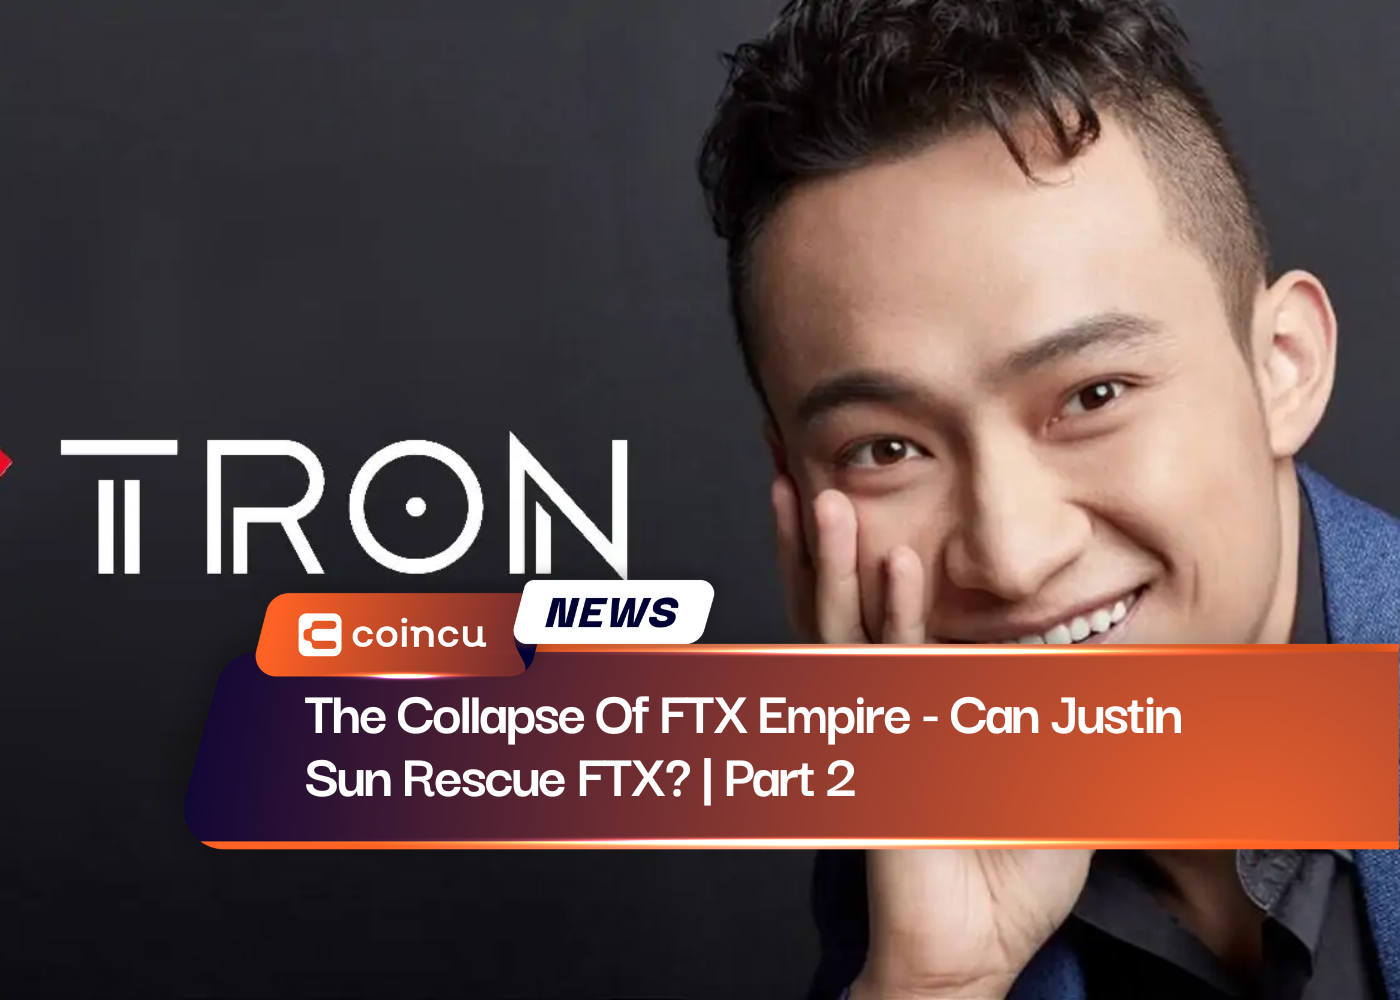 The Collapse Of FTX Empire - Can Justin Sun Rescue FTX? | Part 2